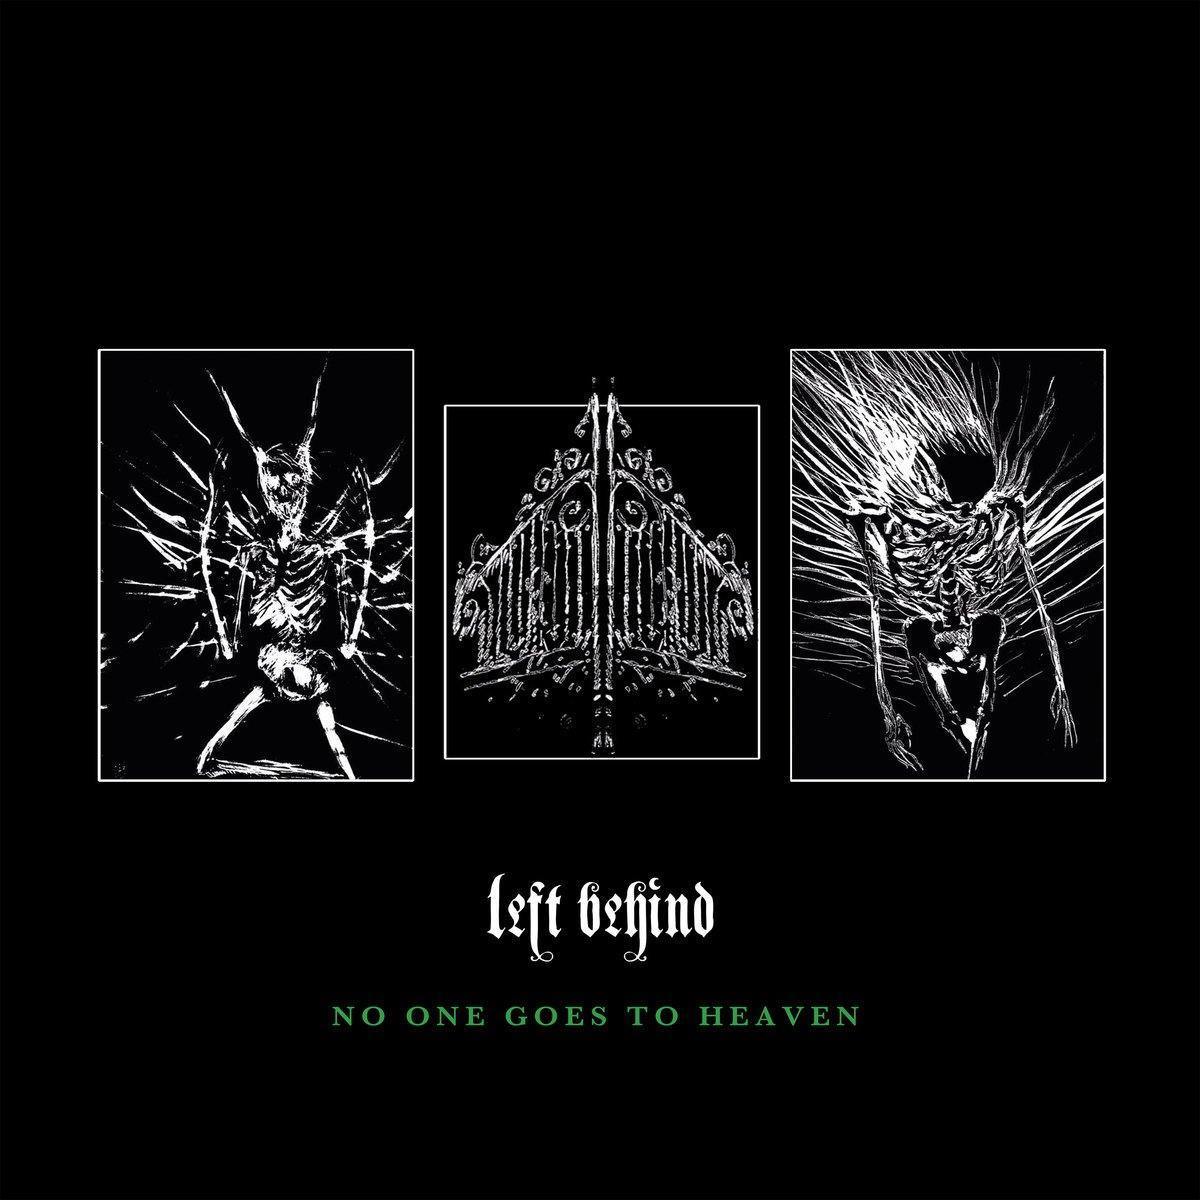 Buy – Left Behind "No One Goes to Heaven" CD – Band & Music Merch – Cold Cuts Merch